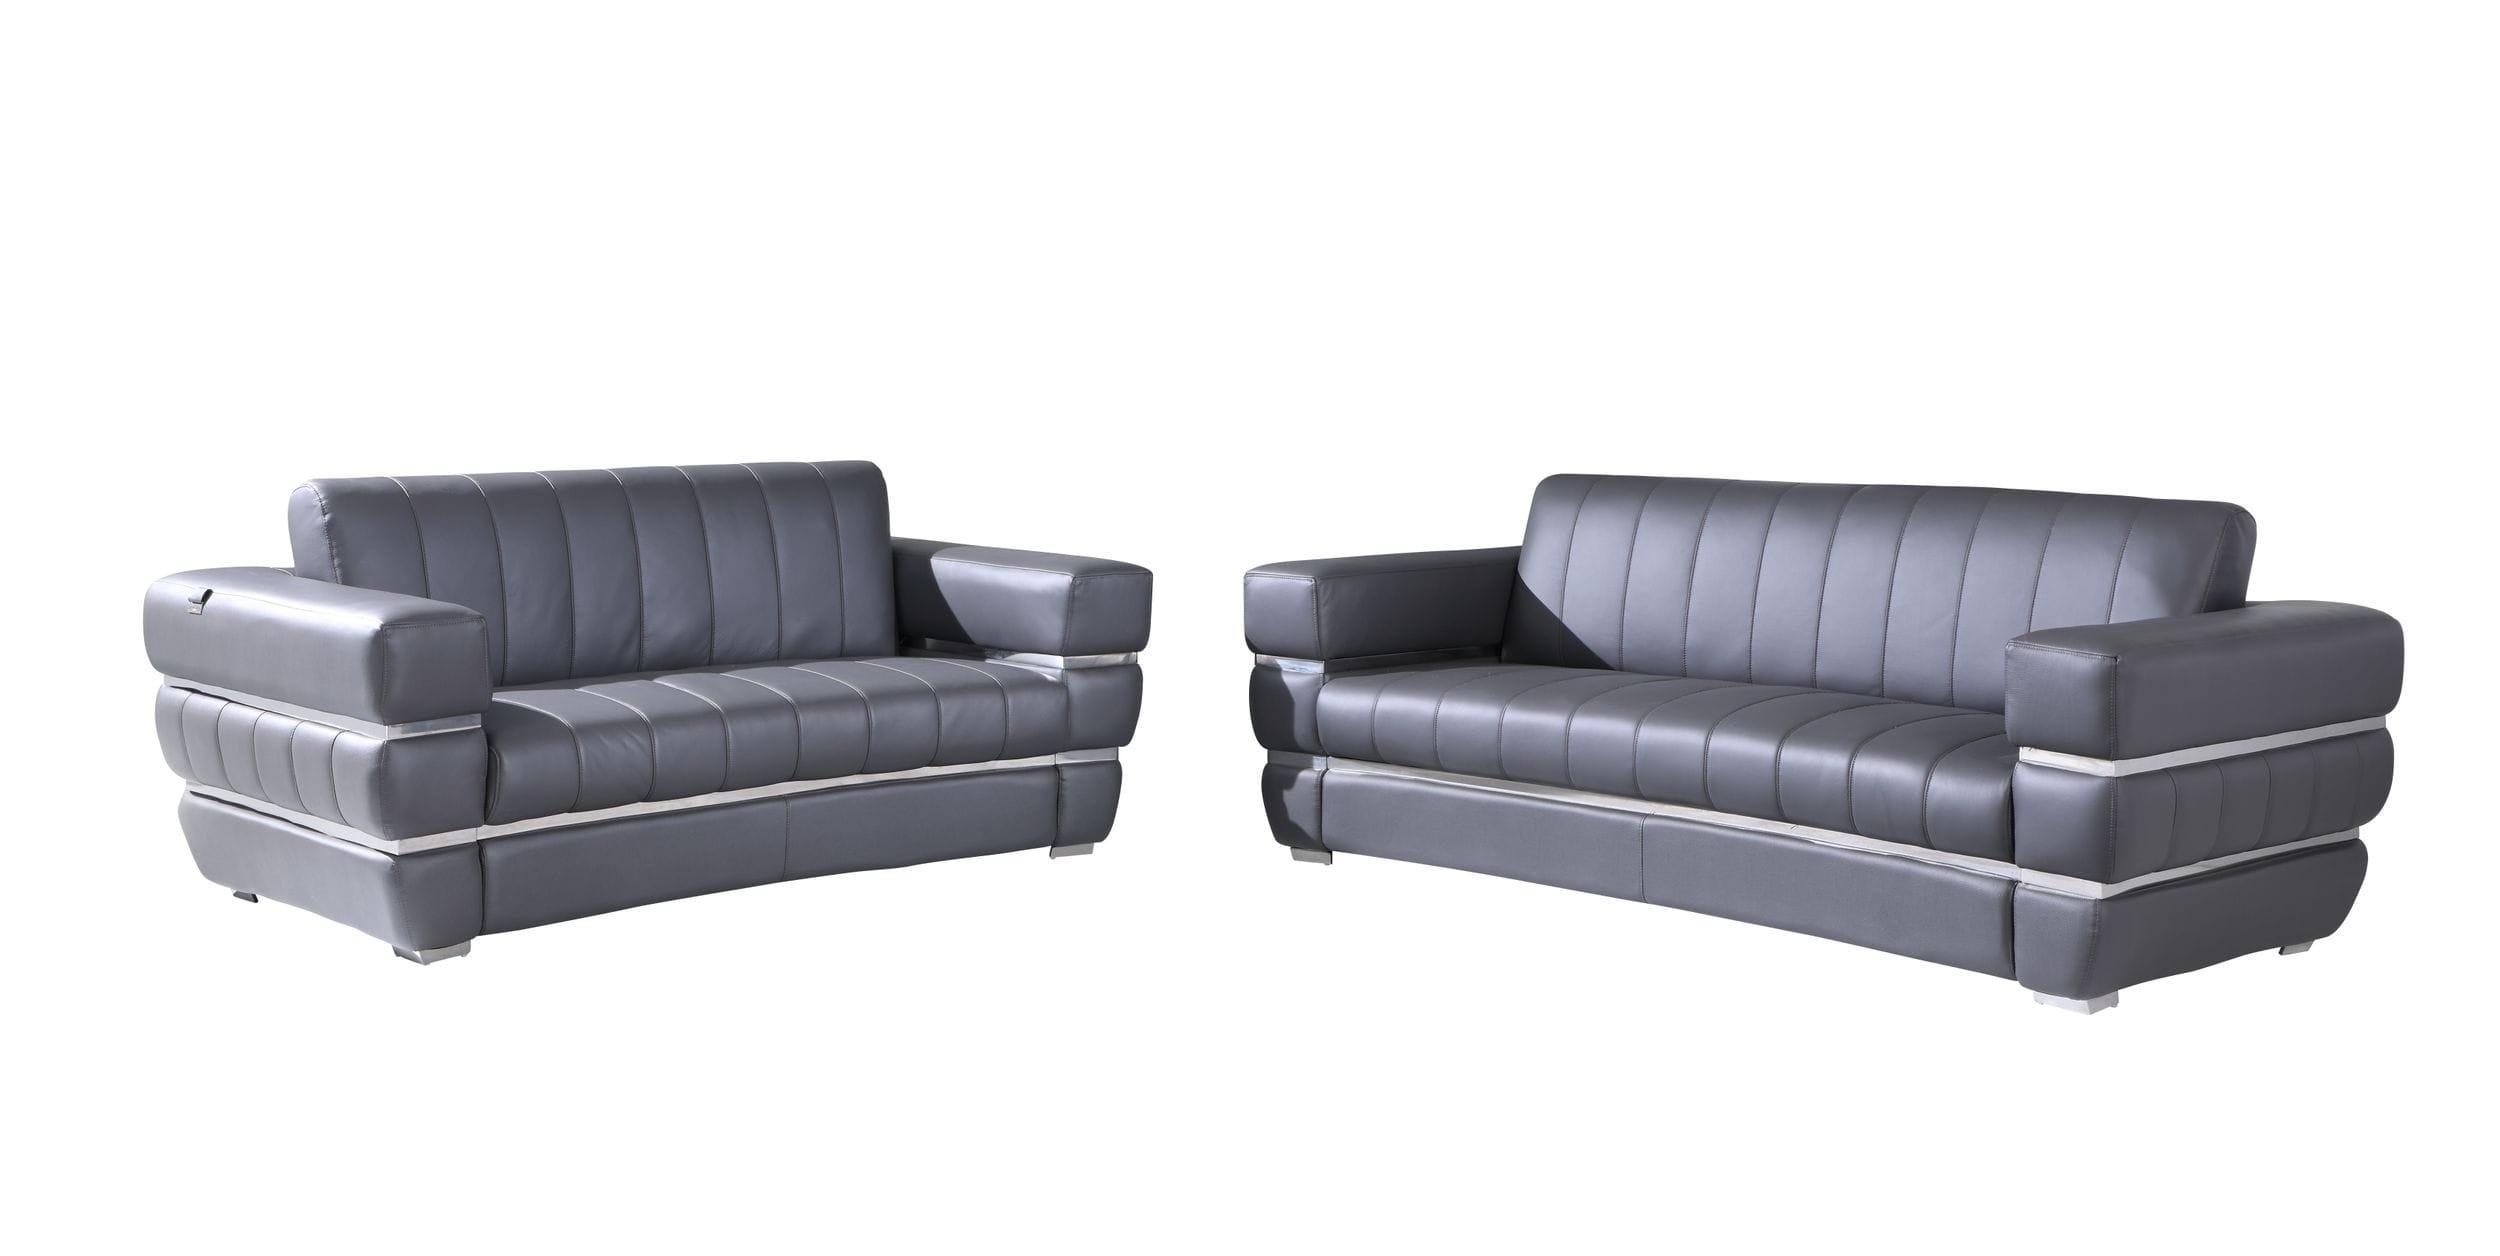 Contemporary Sofa and Loveseat Set 904 904-DK_GRAY-2PC in Gray Leather